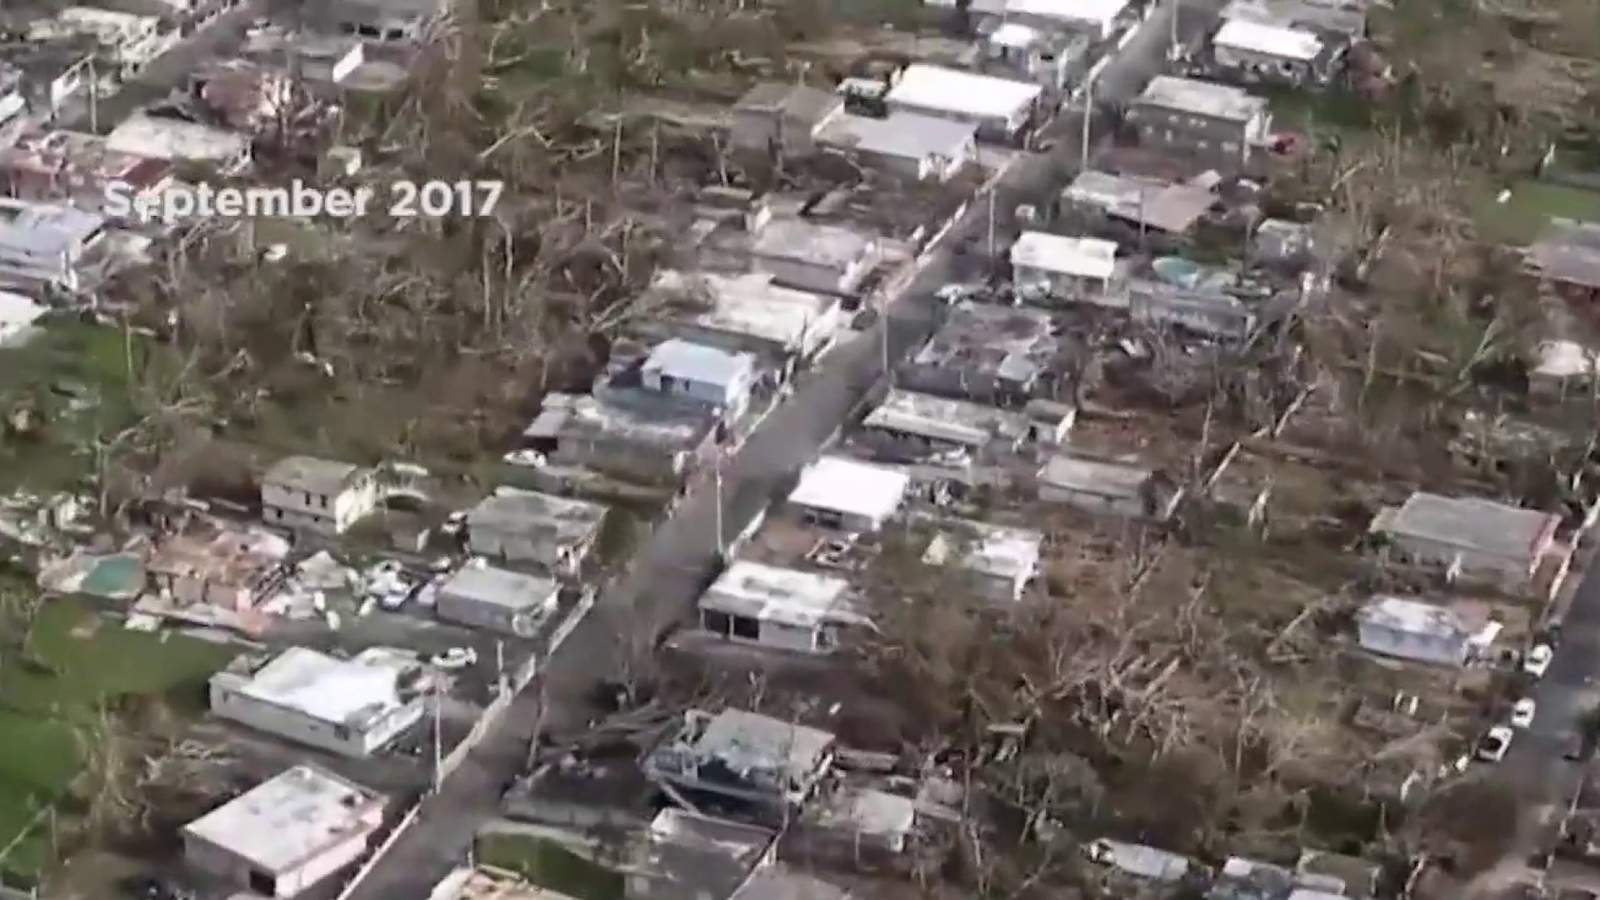 Hurricane Maria recovery efforts continue in Puerto Rico 3 years later